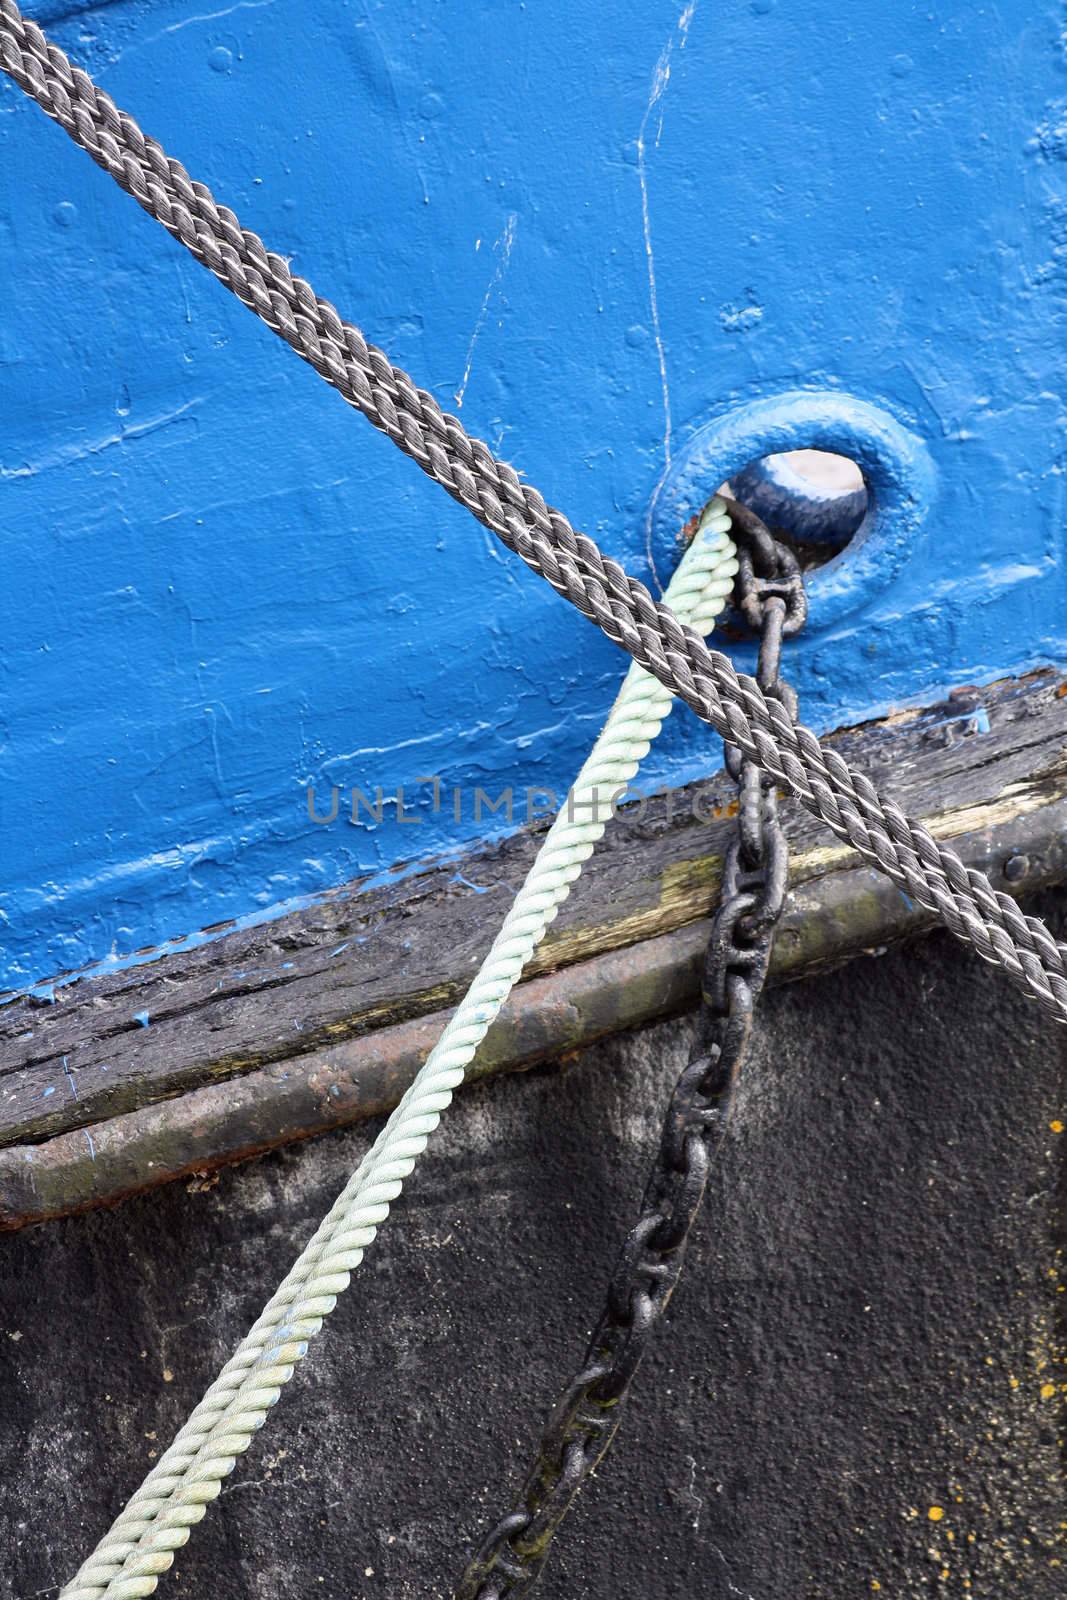 Ship abstract - Ropes and chain by hanhepi